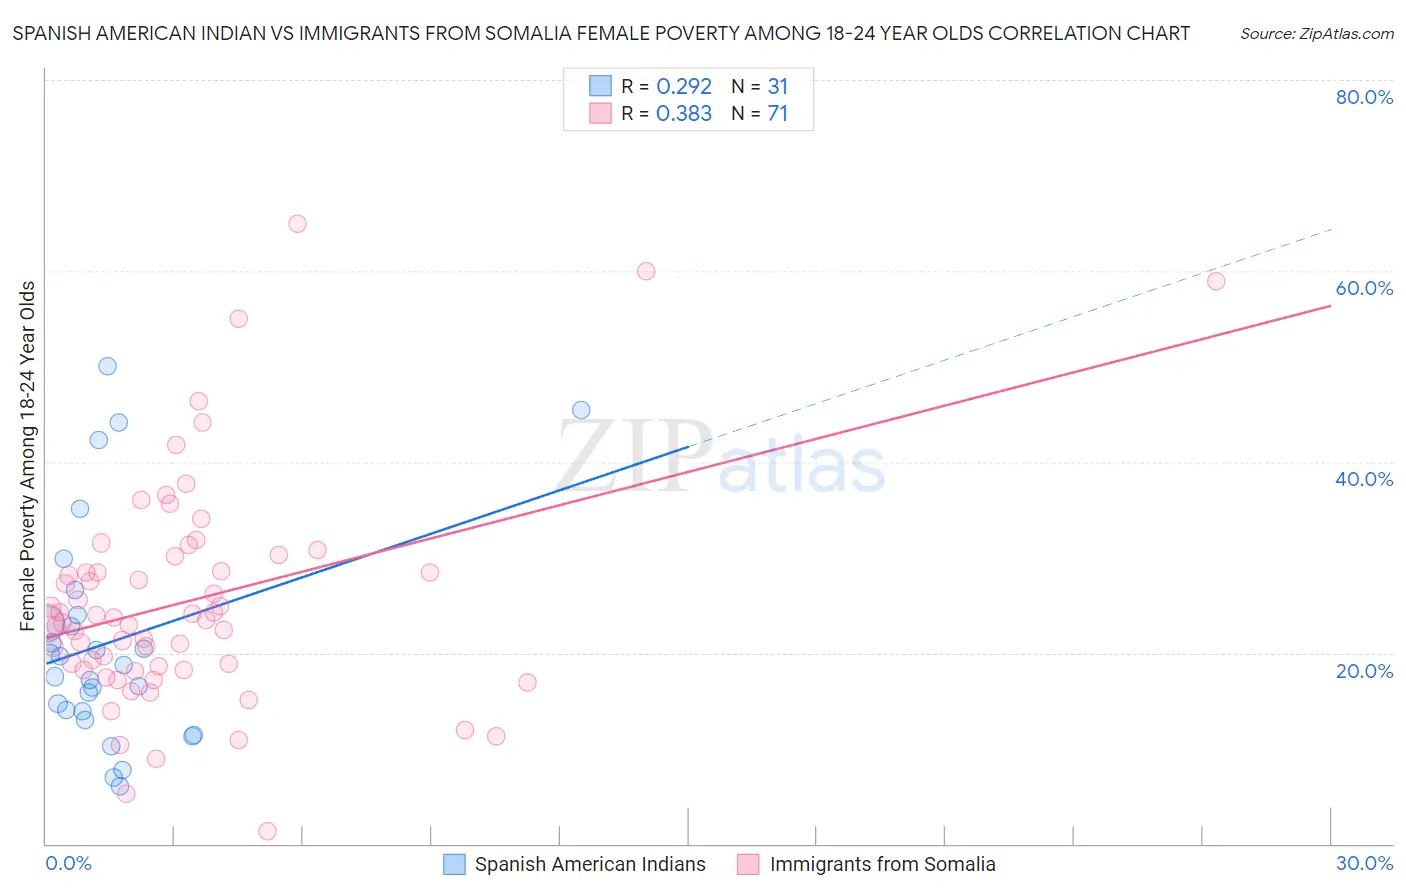 Spanish American Indian vs Immigrants from Somalia Female Poverty Among 18-24 Year Olds